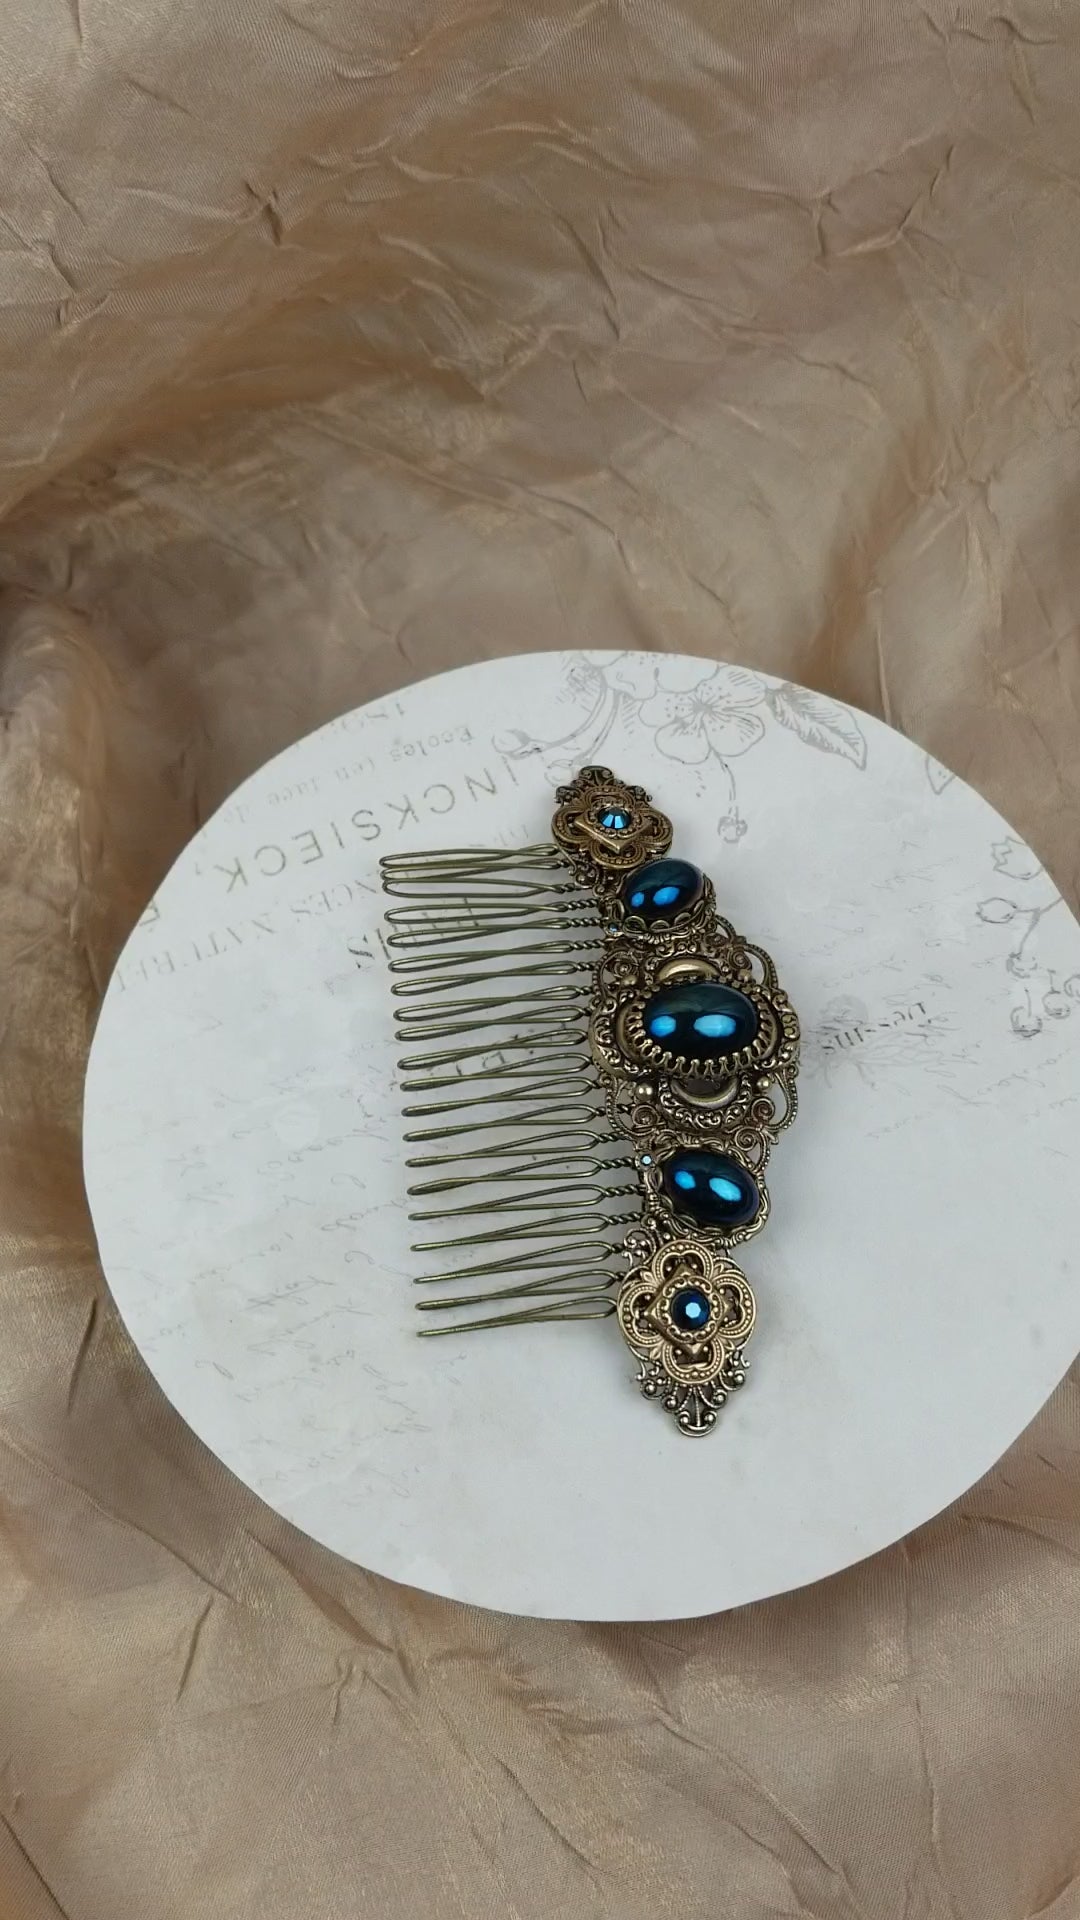 Video: Canterbury Comb in Blue Iris and Antiqued Brass by Rabbitwood and Reason